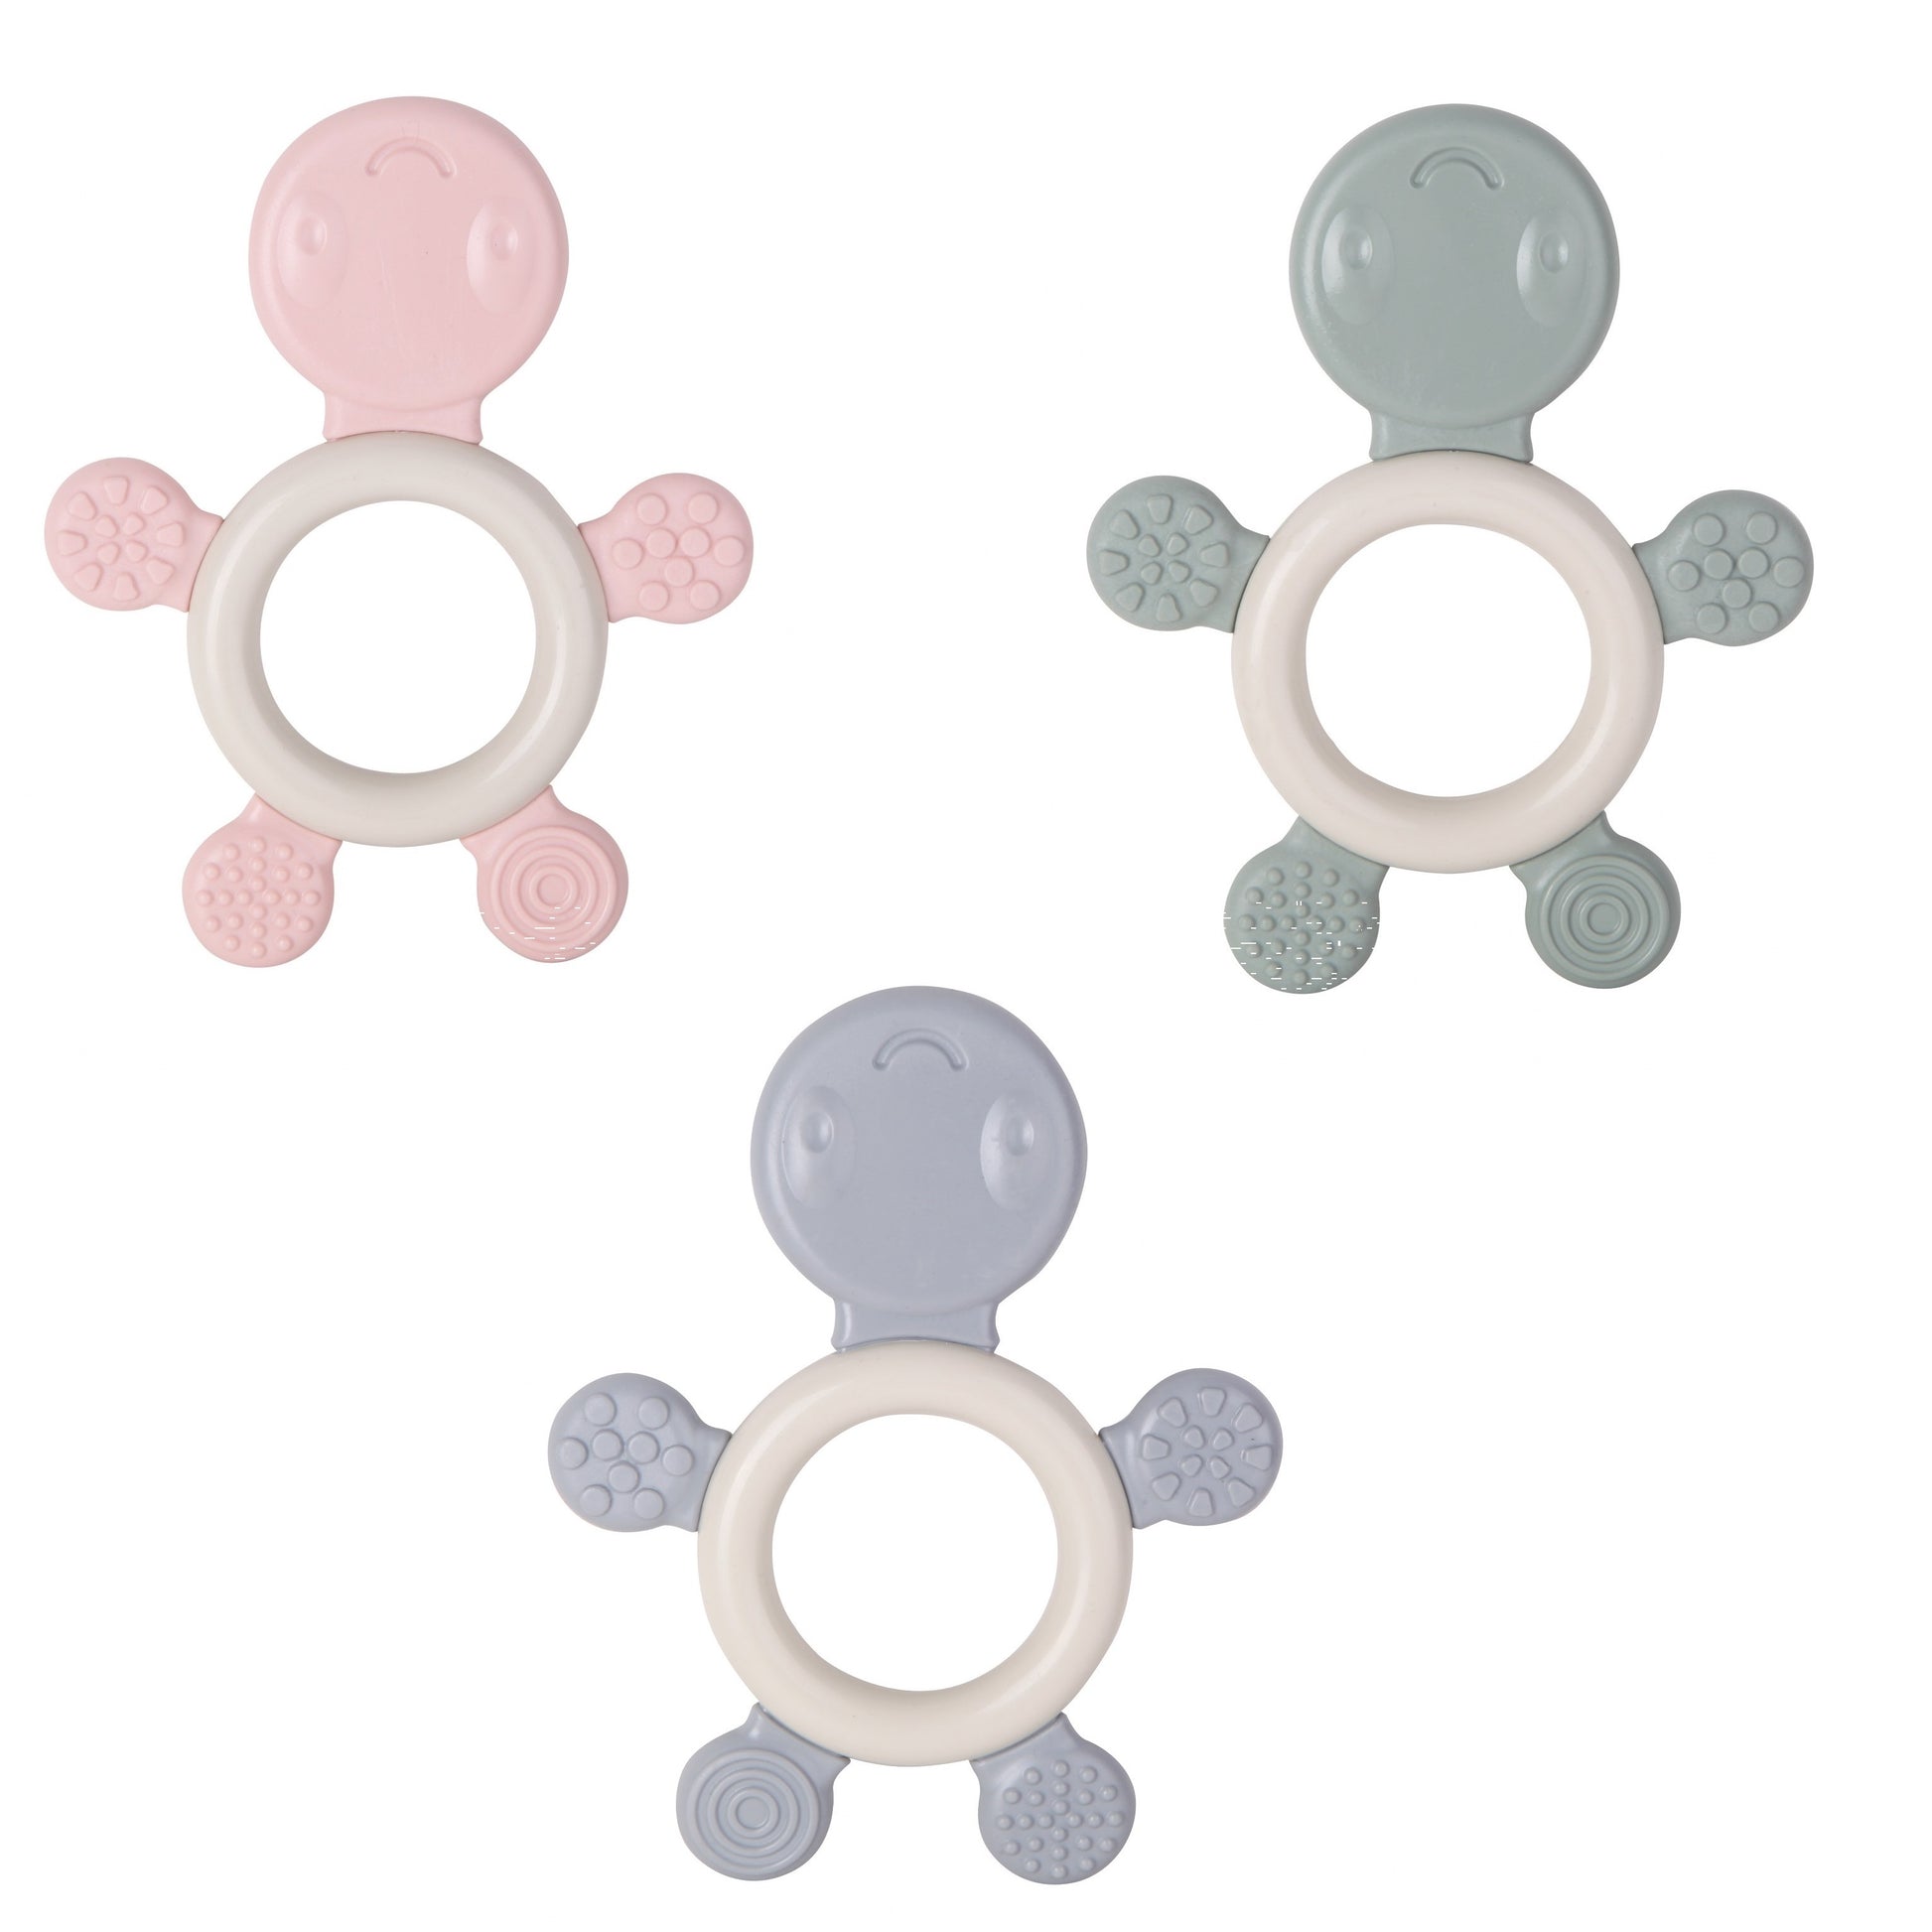 Turtle Teether-BPA, catteether, Teething Bite, Theether, Turtle-Let's Be Child-[Too Twee]-[Tootwee]-[baby]-[newborn]-[clothes]-[essentials]-[toys]-[Lebanon]